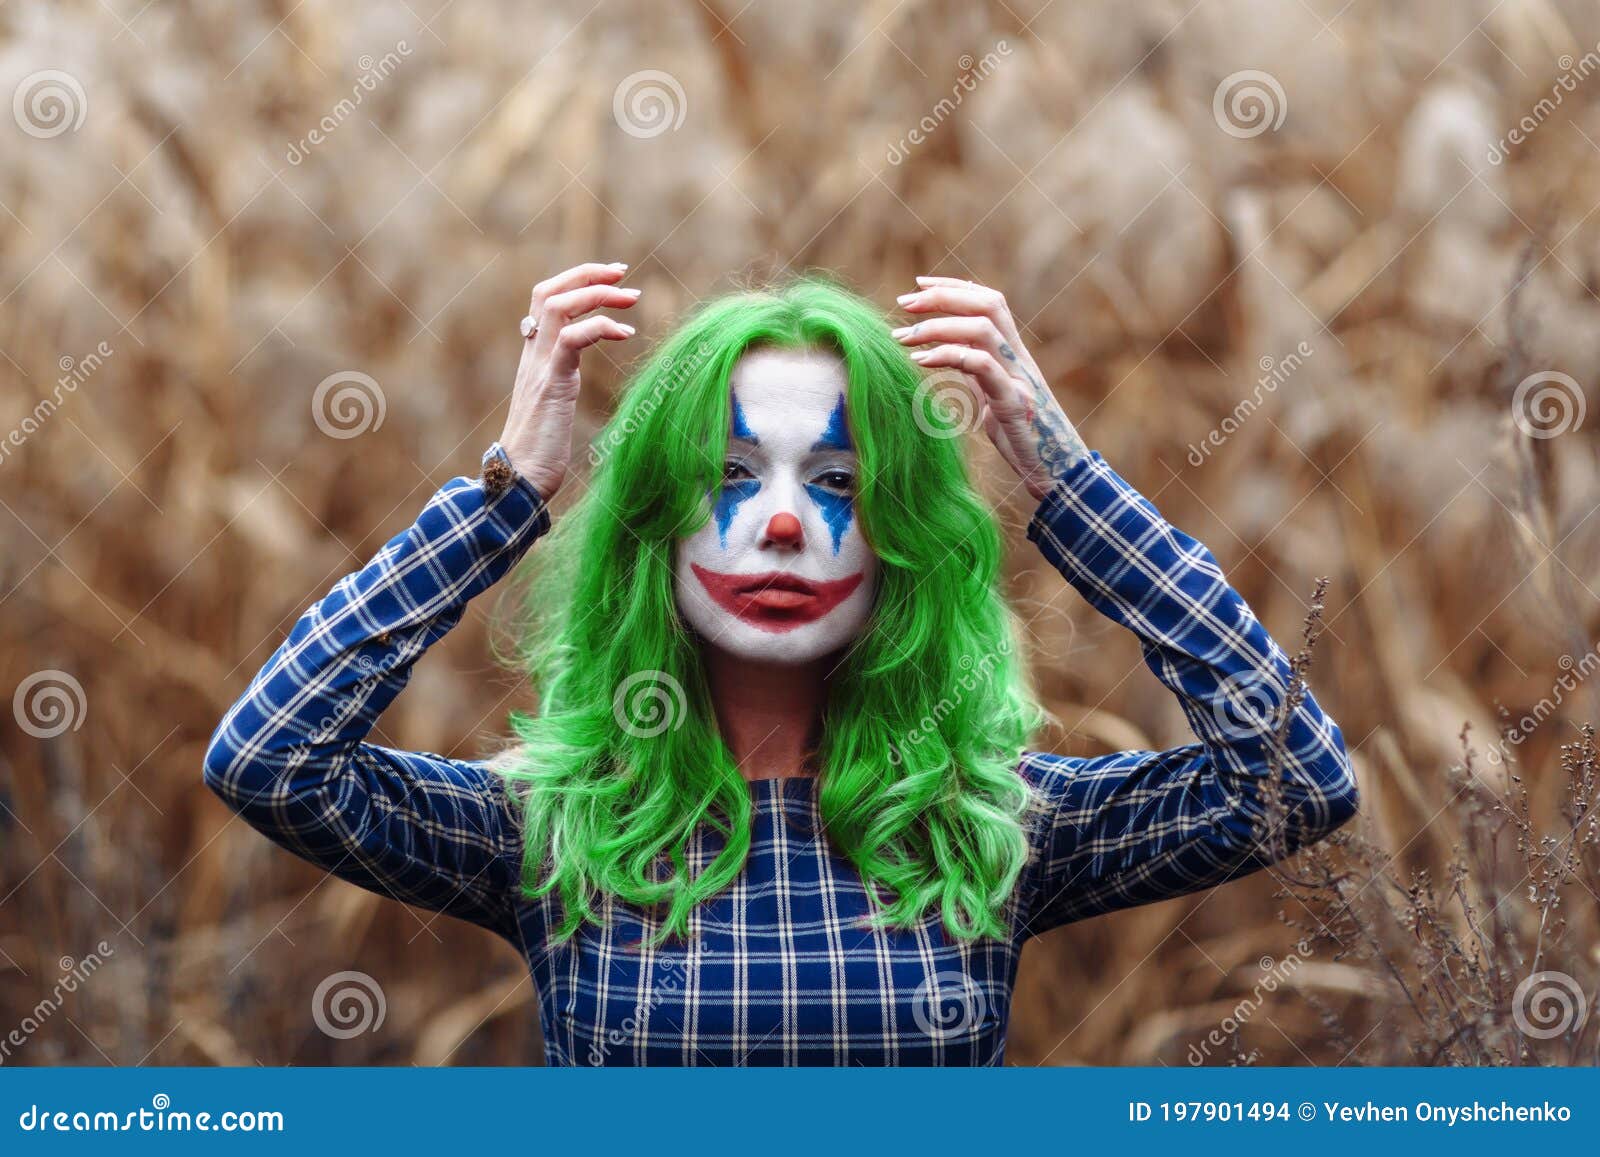 Portrait of a Greenhaired Girl with Joker Makeup on a Orange ...